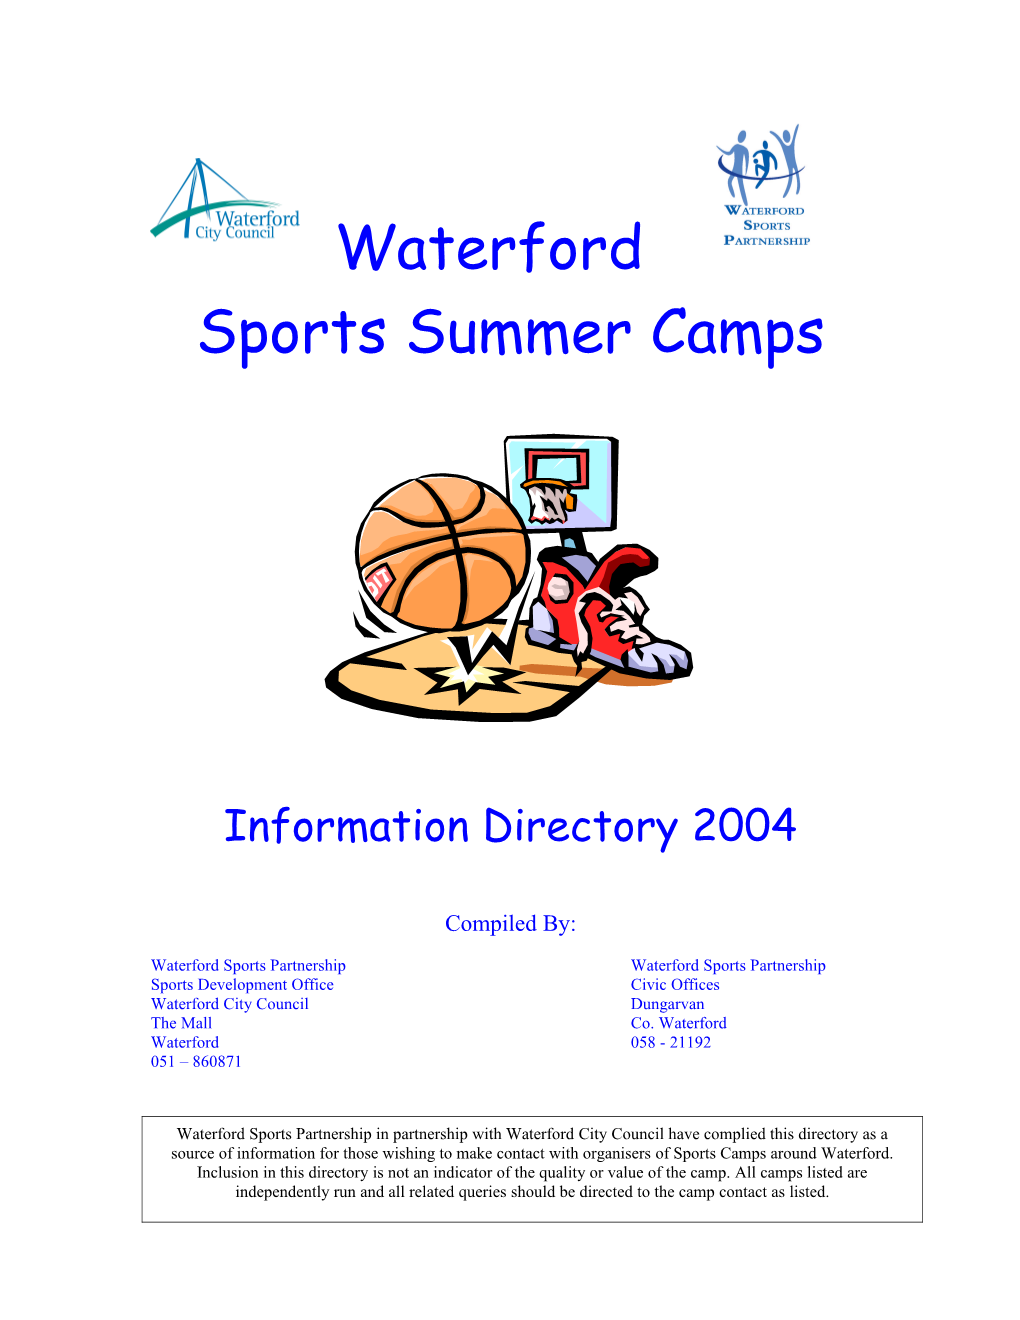 Information Directory 2004